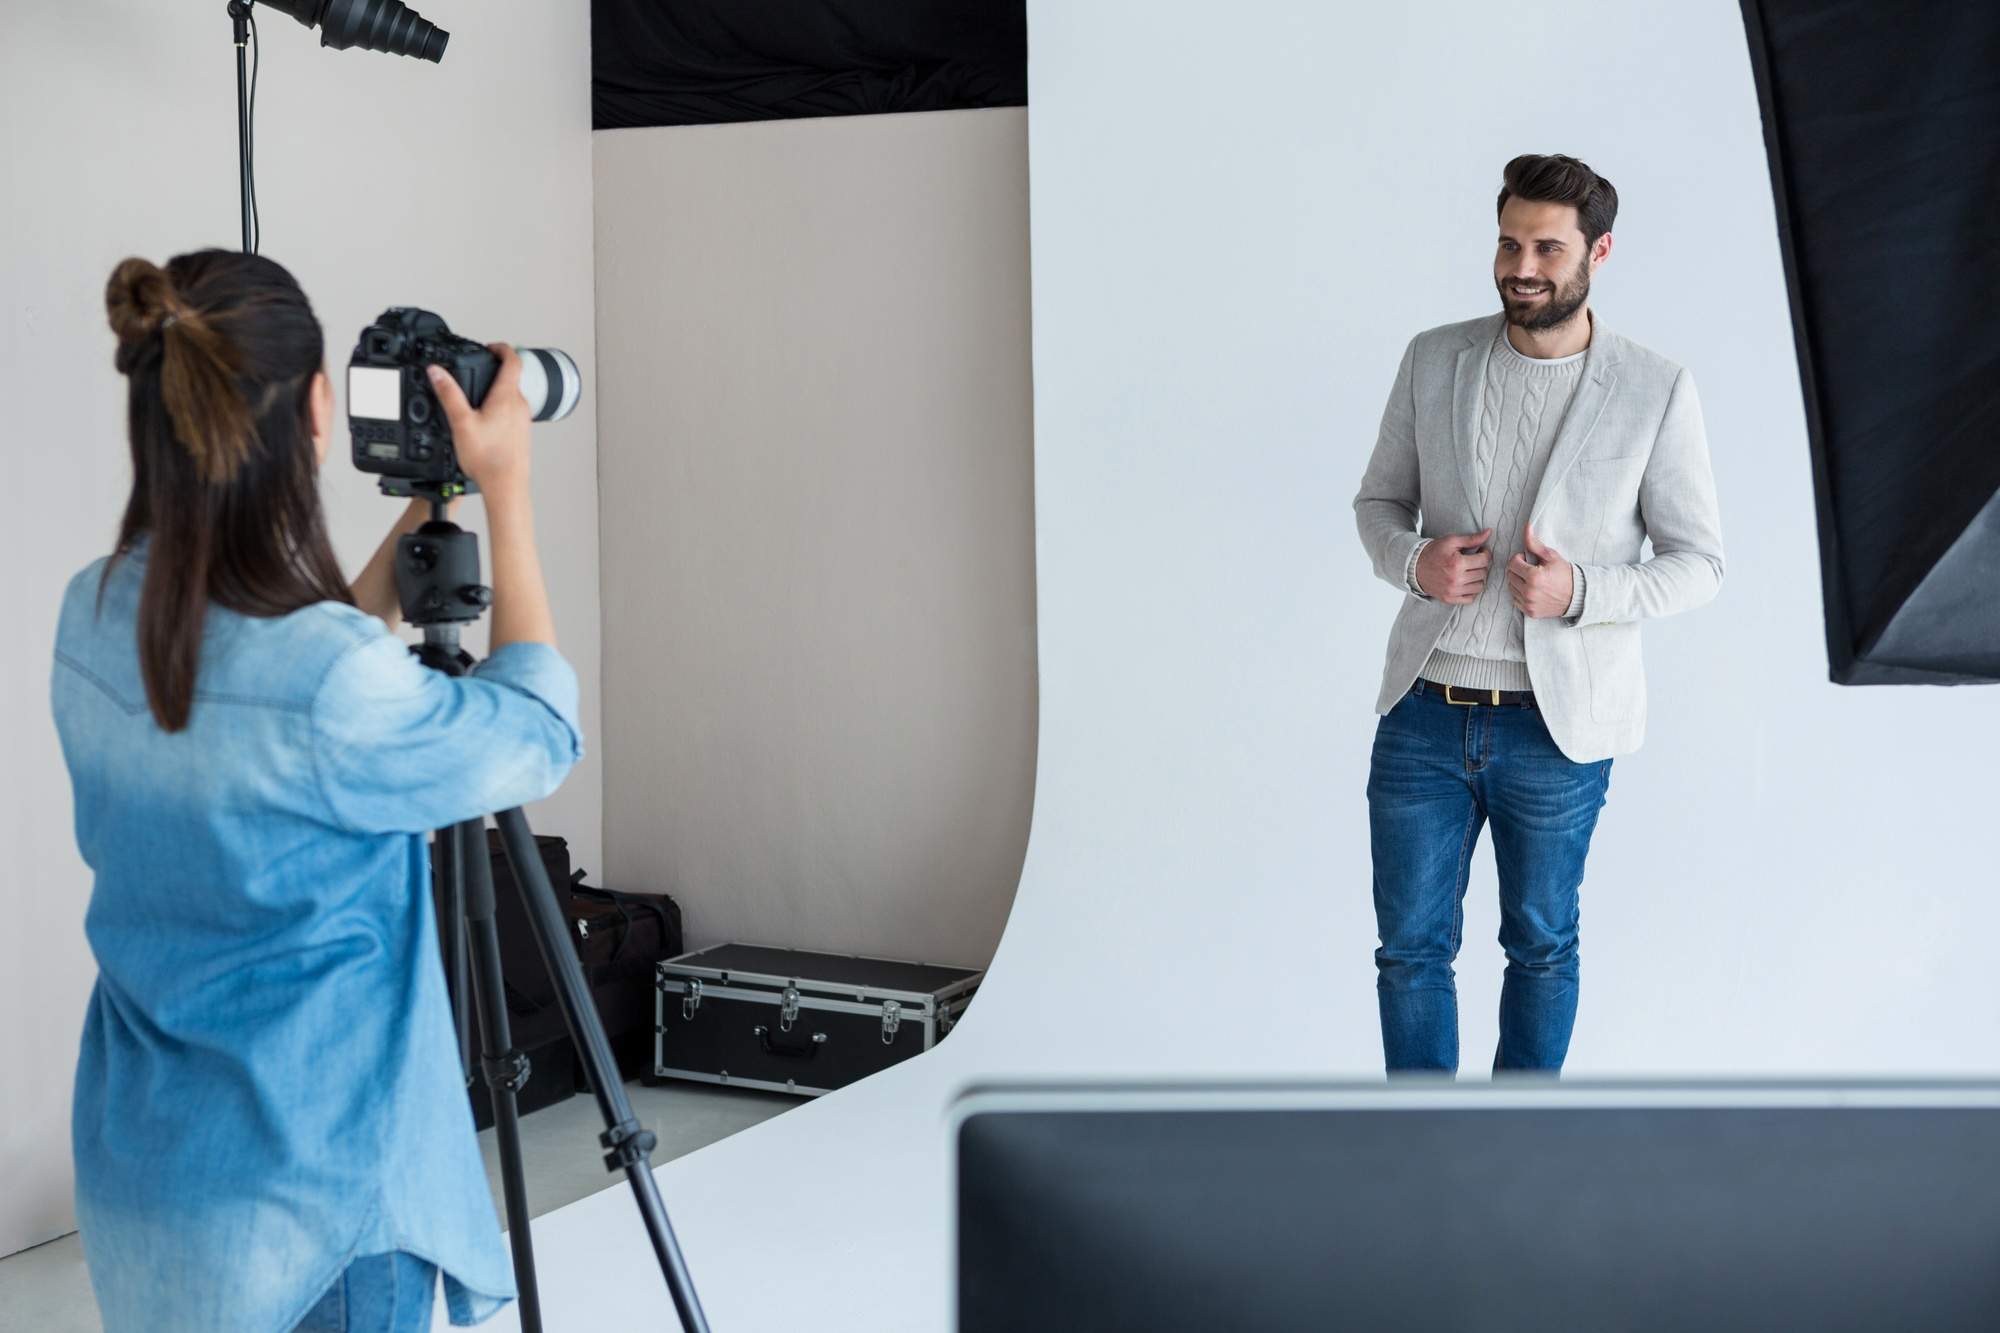 4 Power Poses to Help You Nail Your Next Corporate Headshot